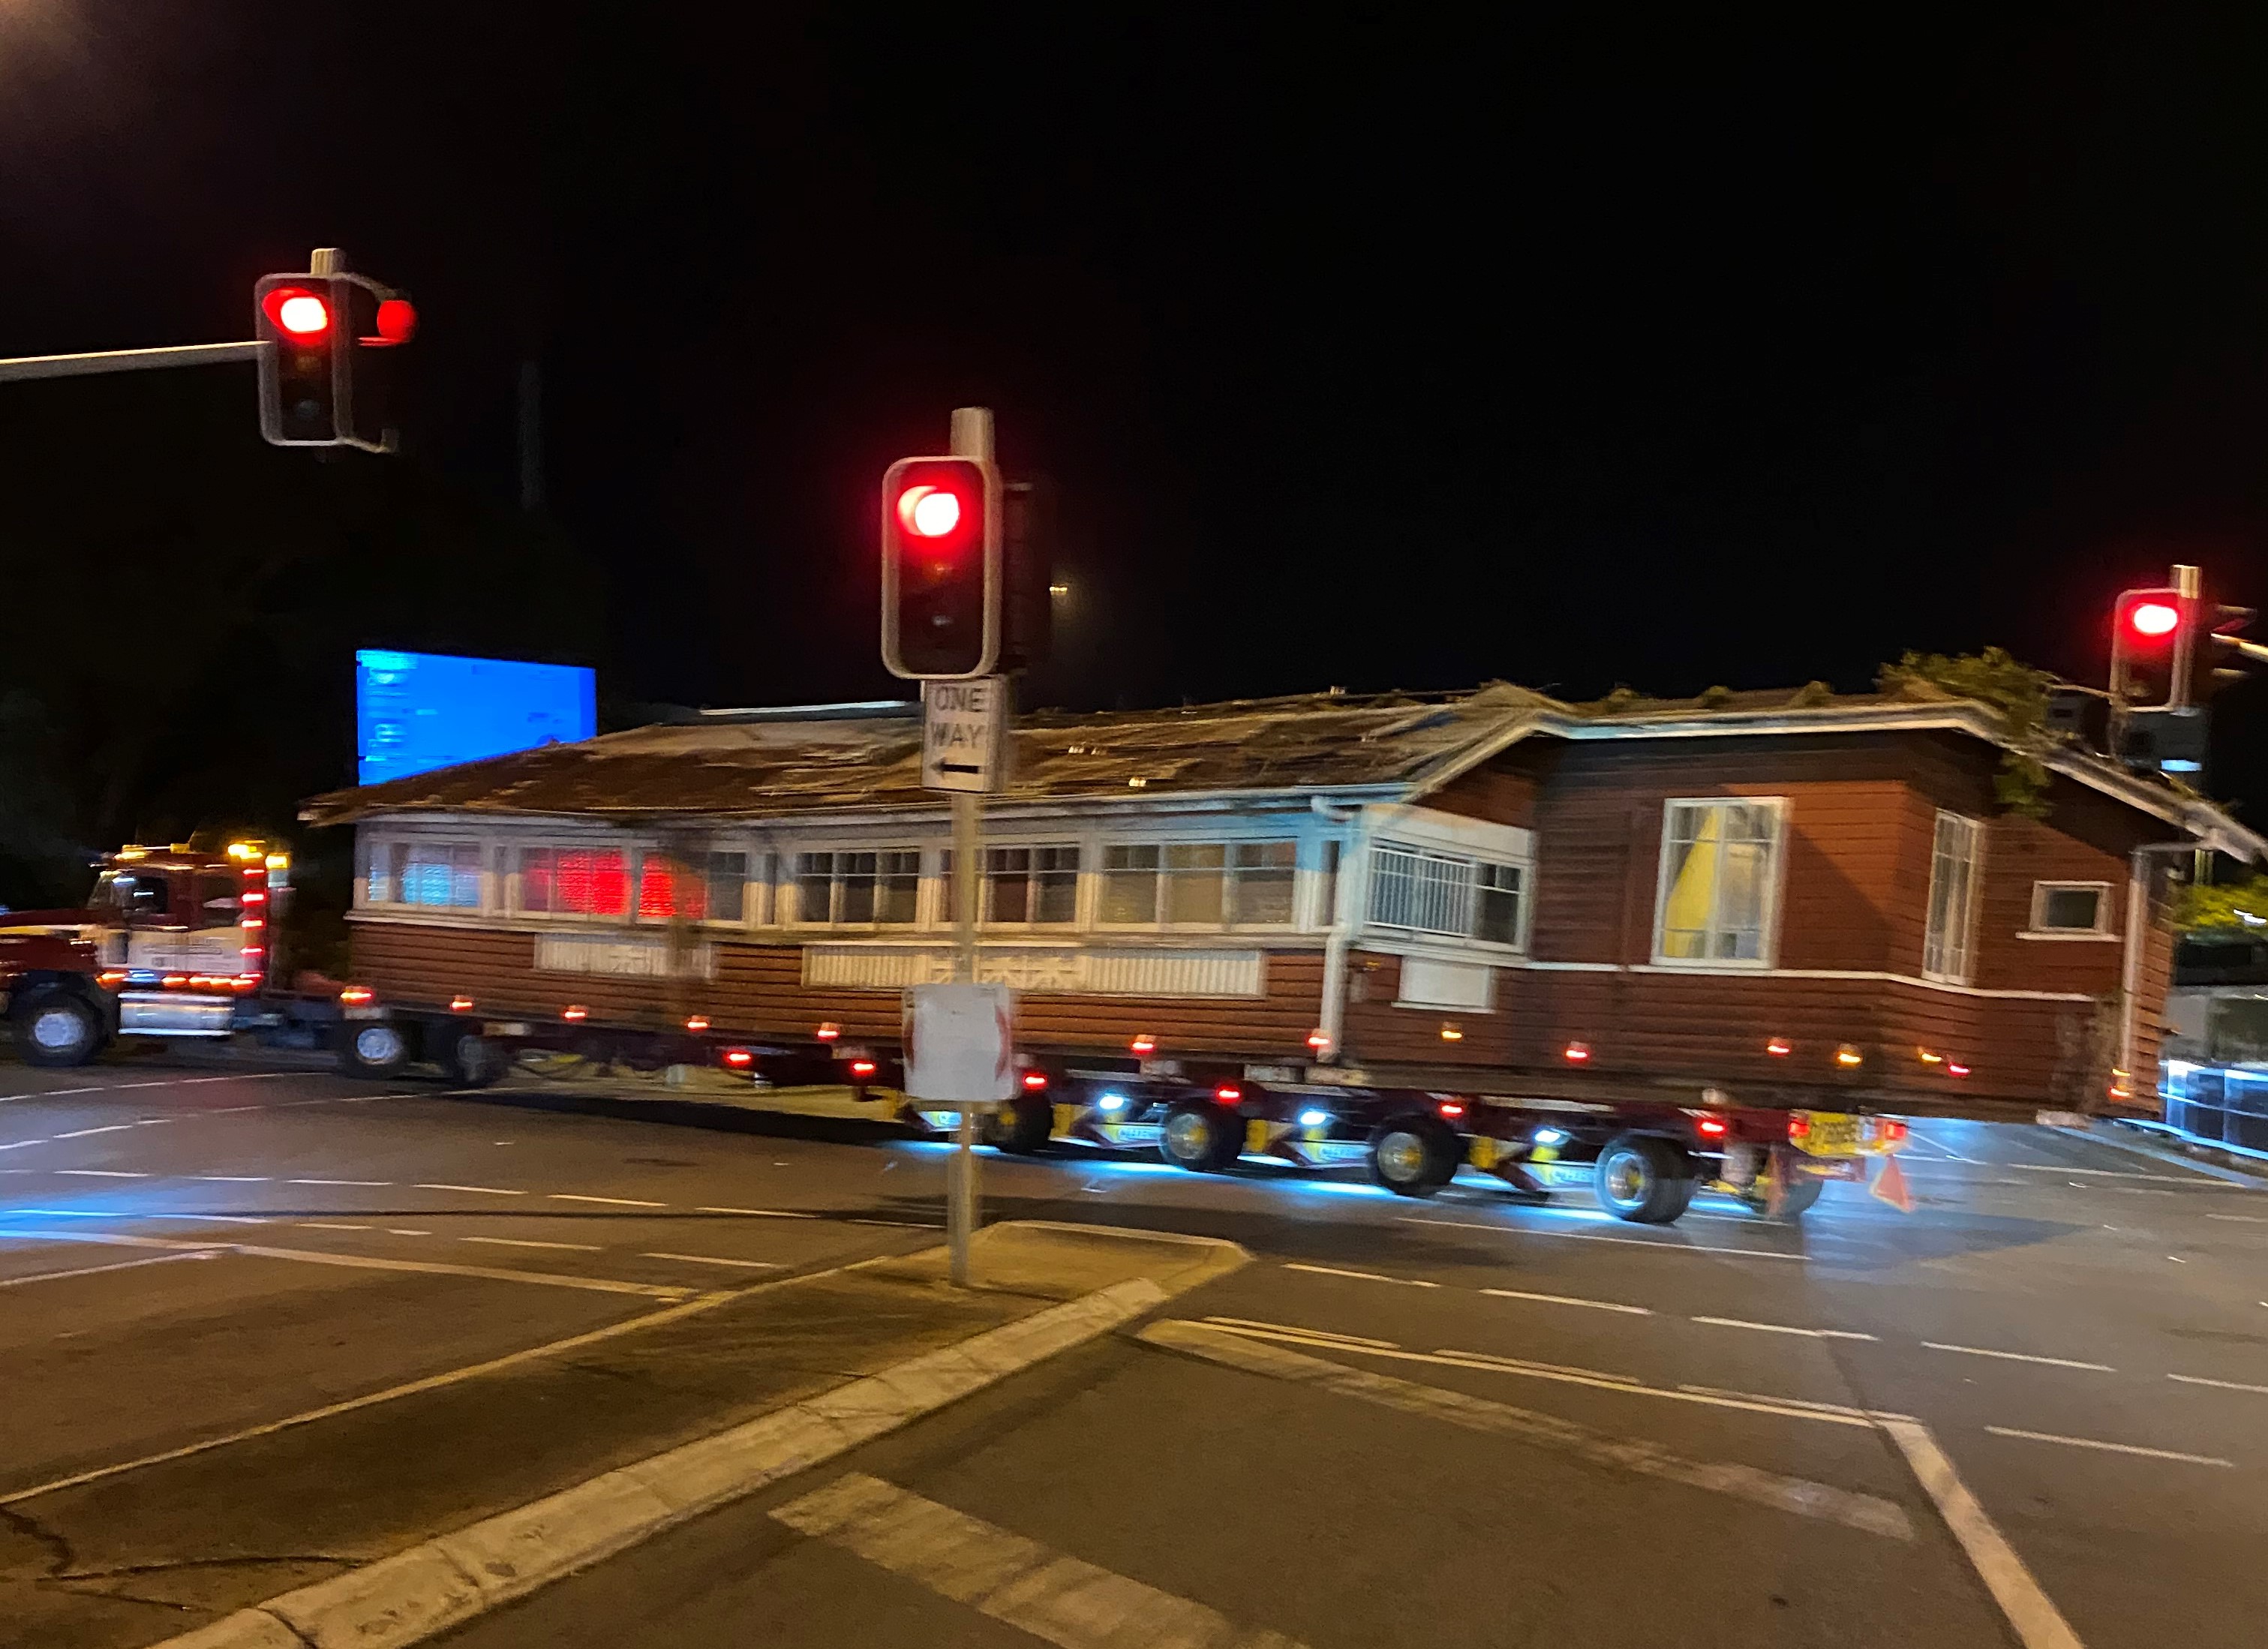 A red queenslander house on the back of a truck going through an intersection at night.